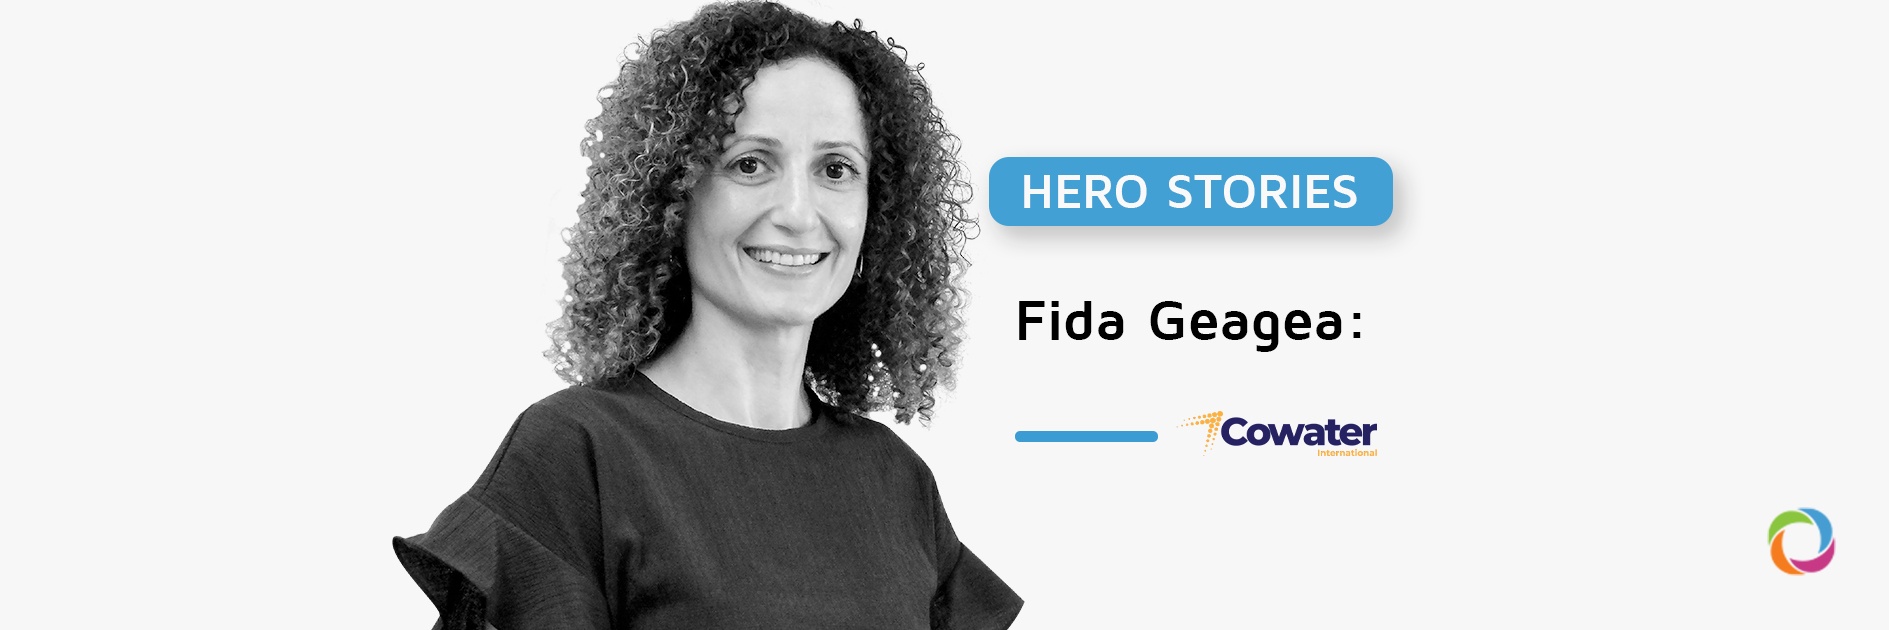 Hero Stories | Fida Geagea: A gender equality advocate inspired by the power of strong women to keep families and communities safe and resilient